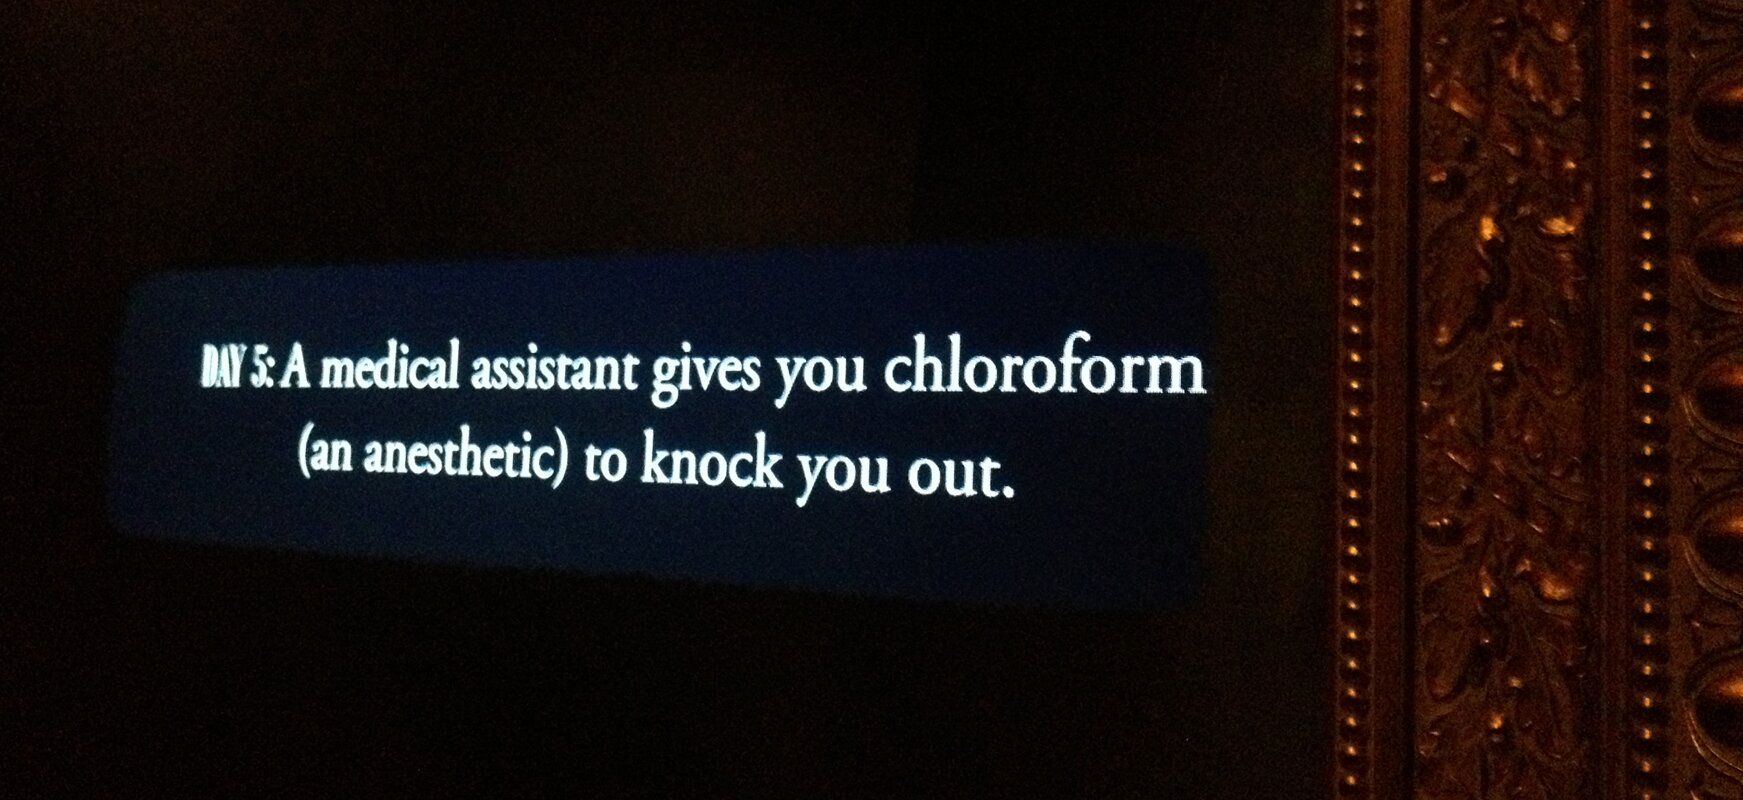 A screen that reads "A medical assistant gives you chloroform to knock you out".